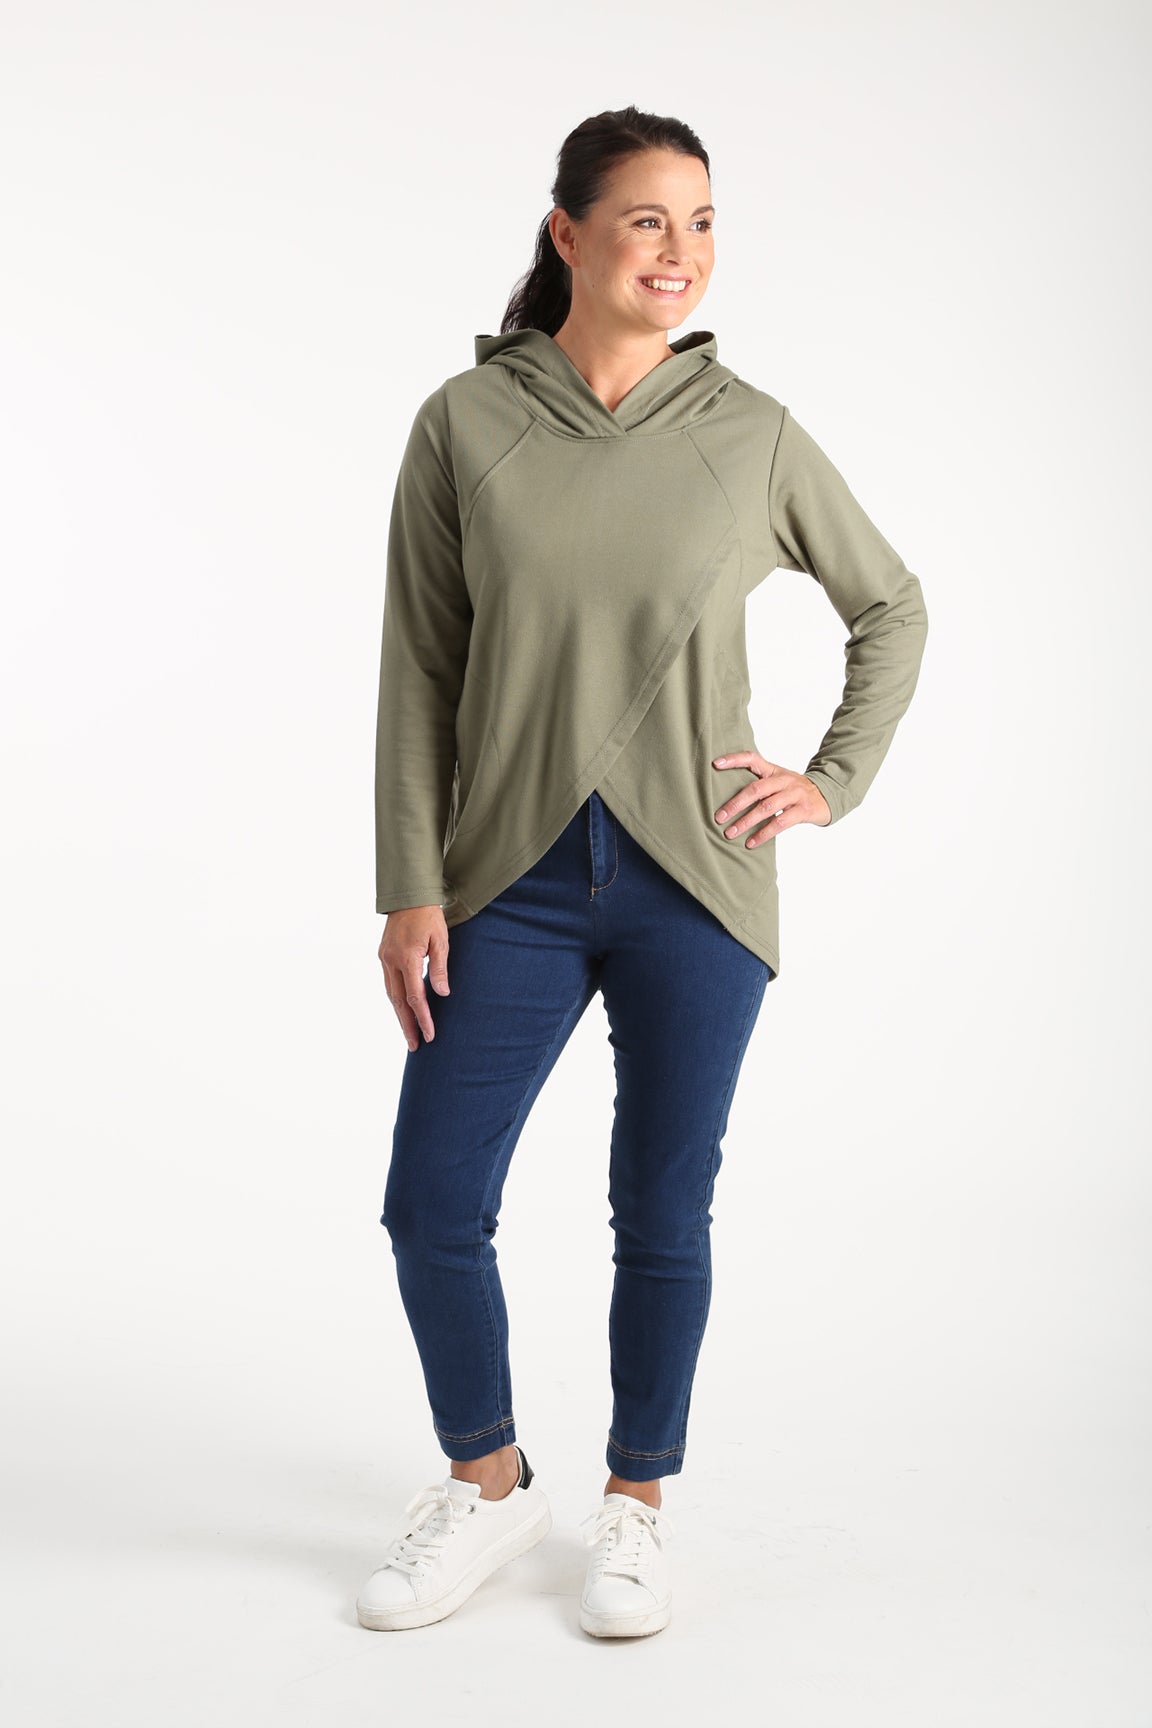 https://www.carolineeve.co.nz/content/products/tunic-curved-hem-hood-long-sleeve-hsp-76cm-to-lp-sage-1-4403mm.jpg